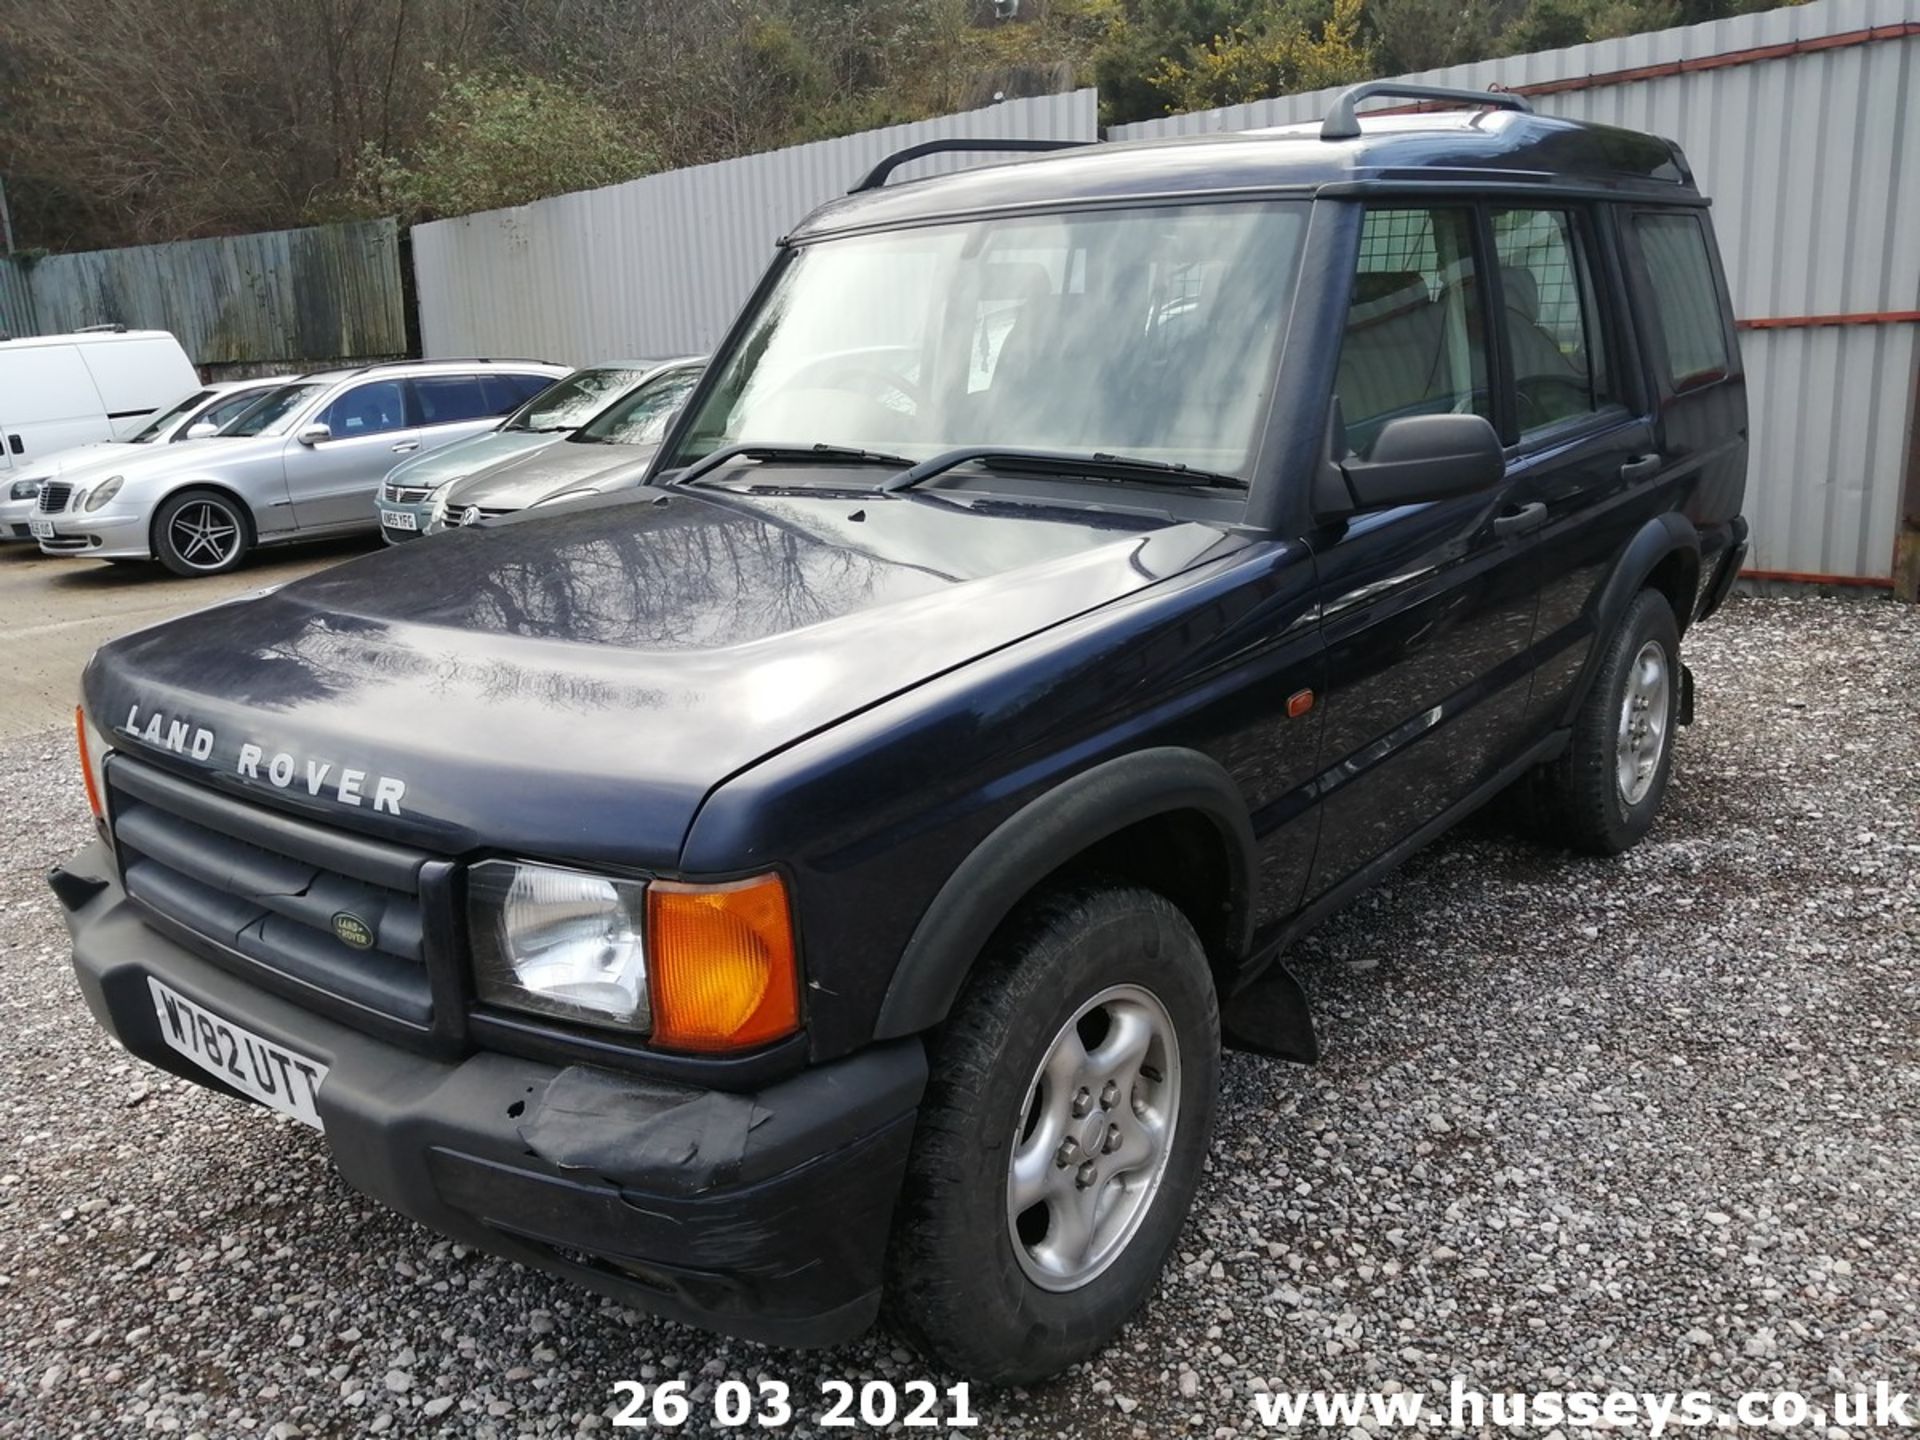 2000 LAND ROVER DISCOVERY - 2500cc 5dr Estate (Blue) - Image 5 of 23